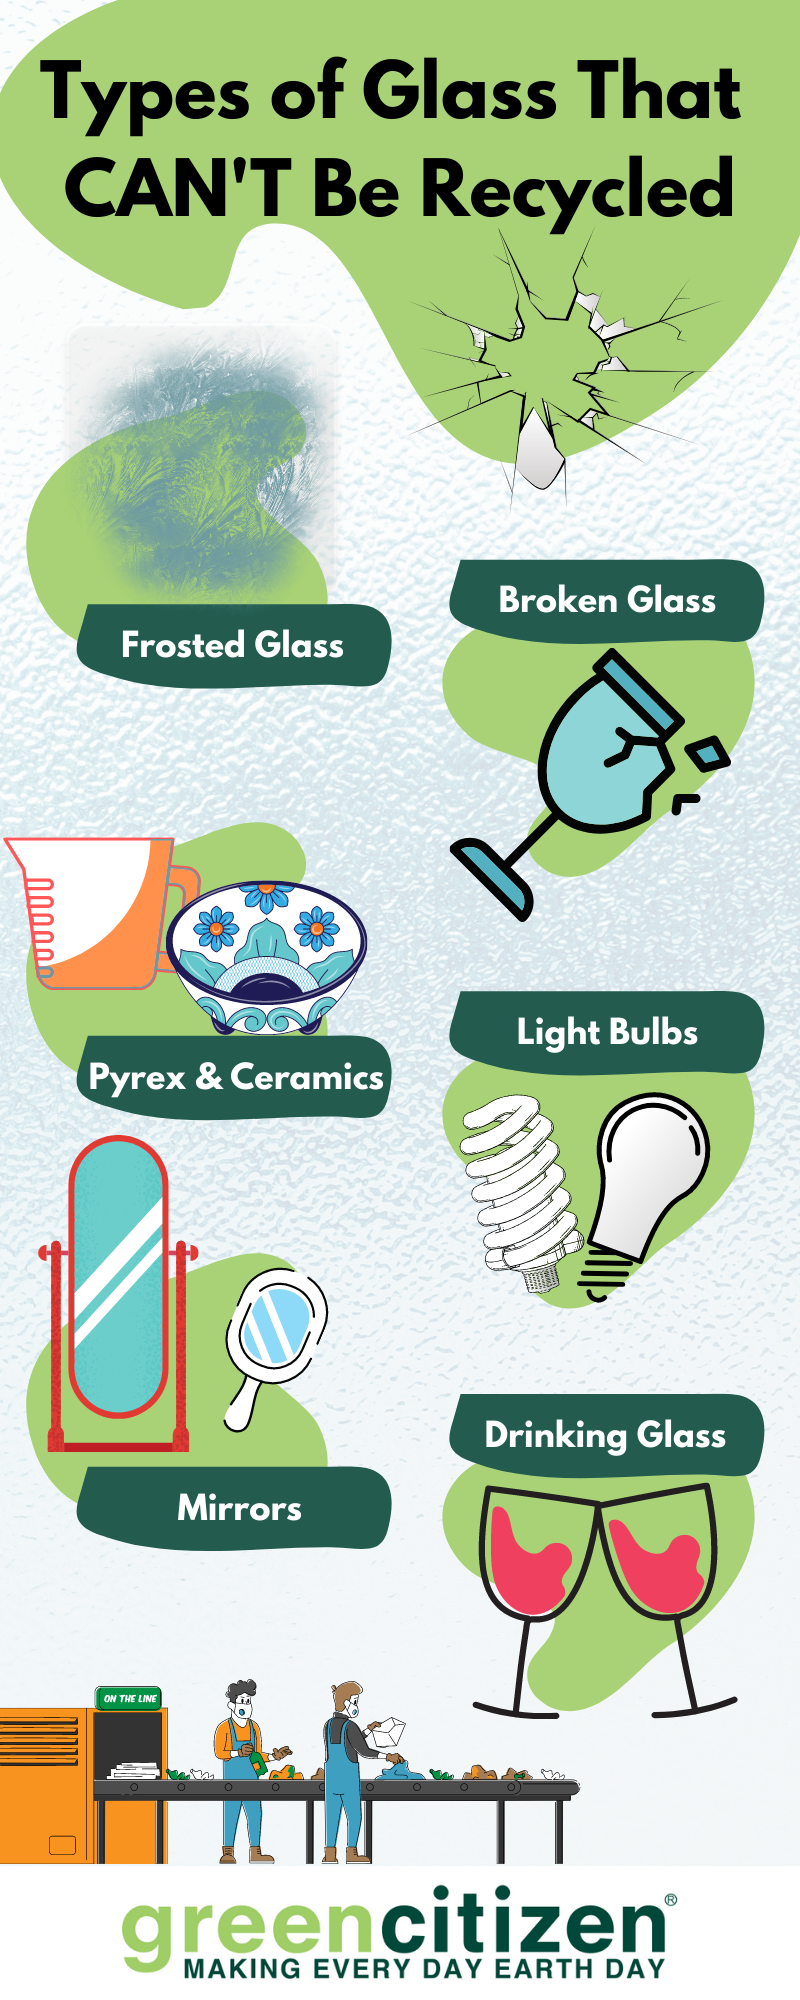 Types of Glass That CAN'T Be Recycled